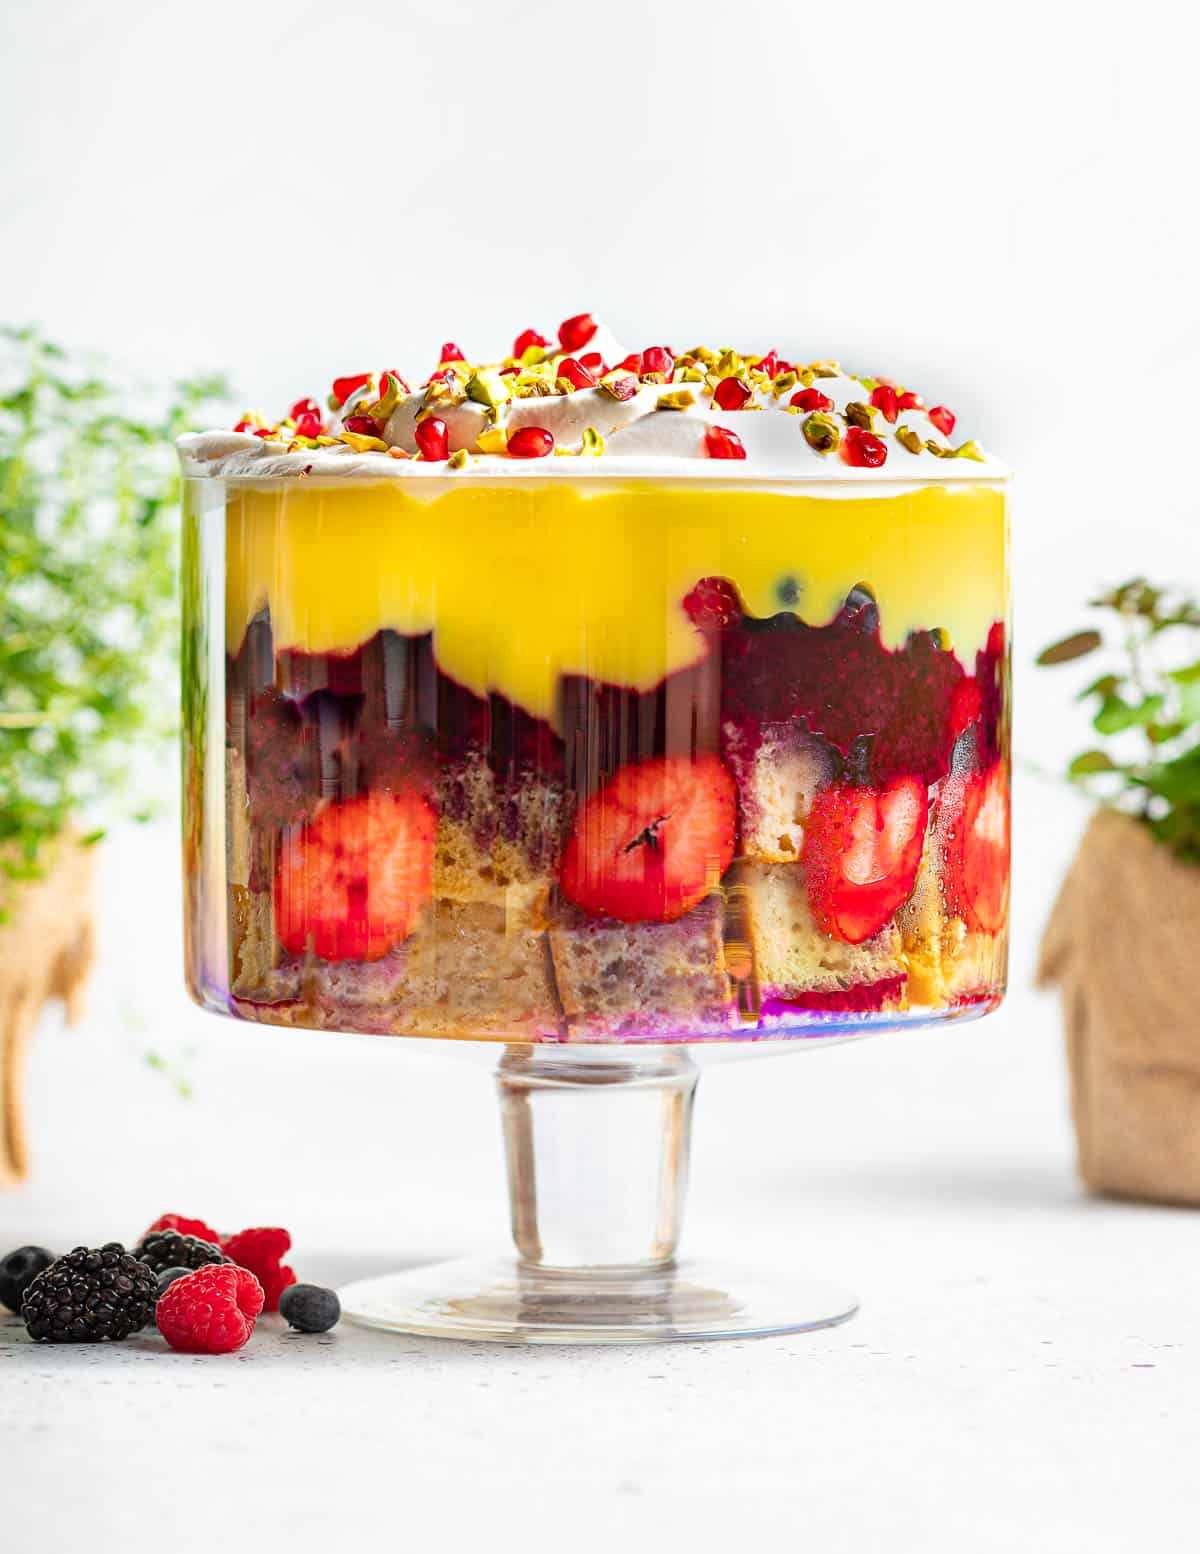 Incredible Vegan Trifle! This British favourite has layers upon layers of vegan sponge cake, mixed berry compote, vegan custard, vegan whipped cream and fresh fruit. Dessert doesn't get better than this! "